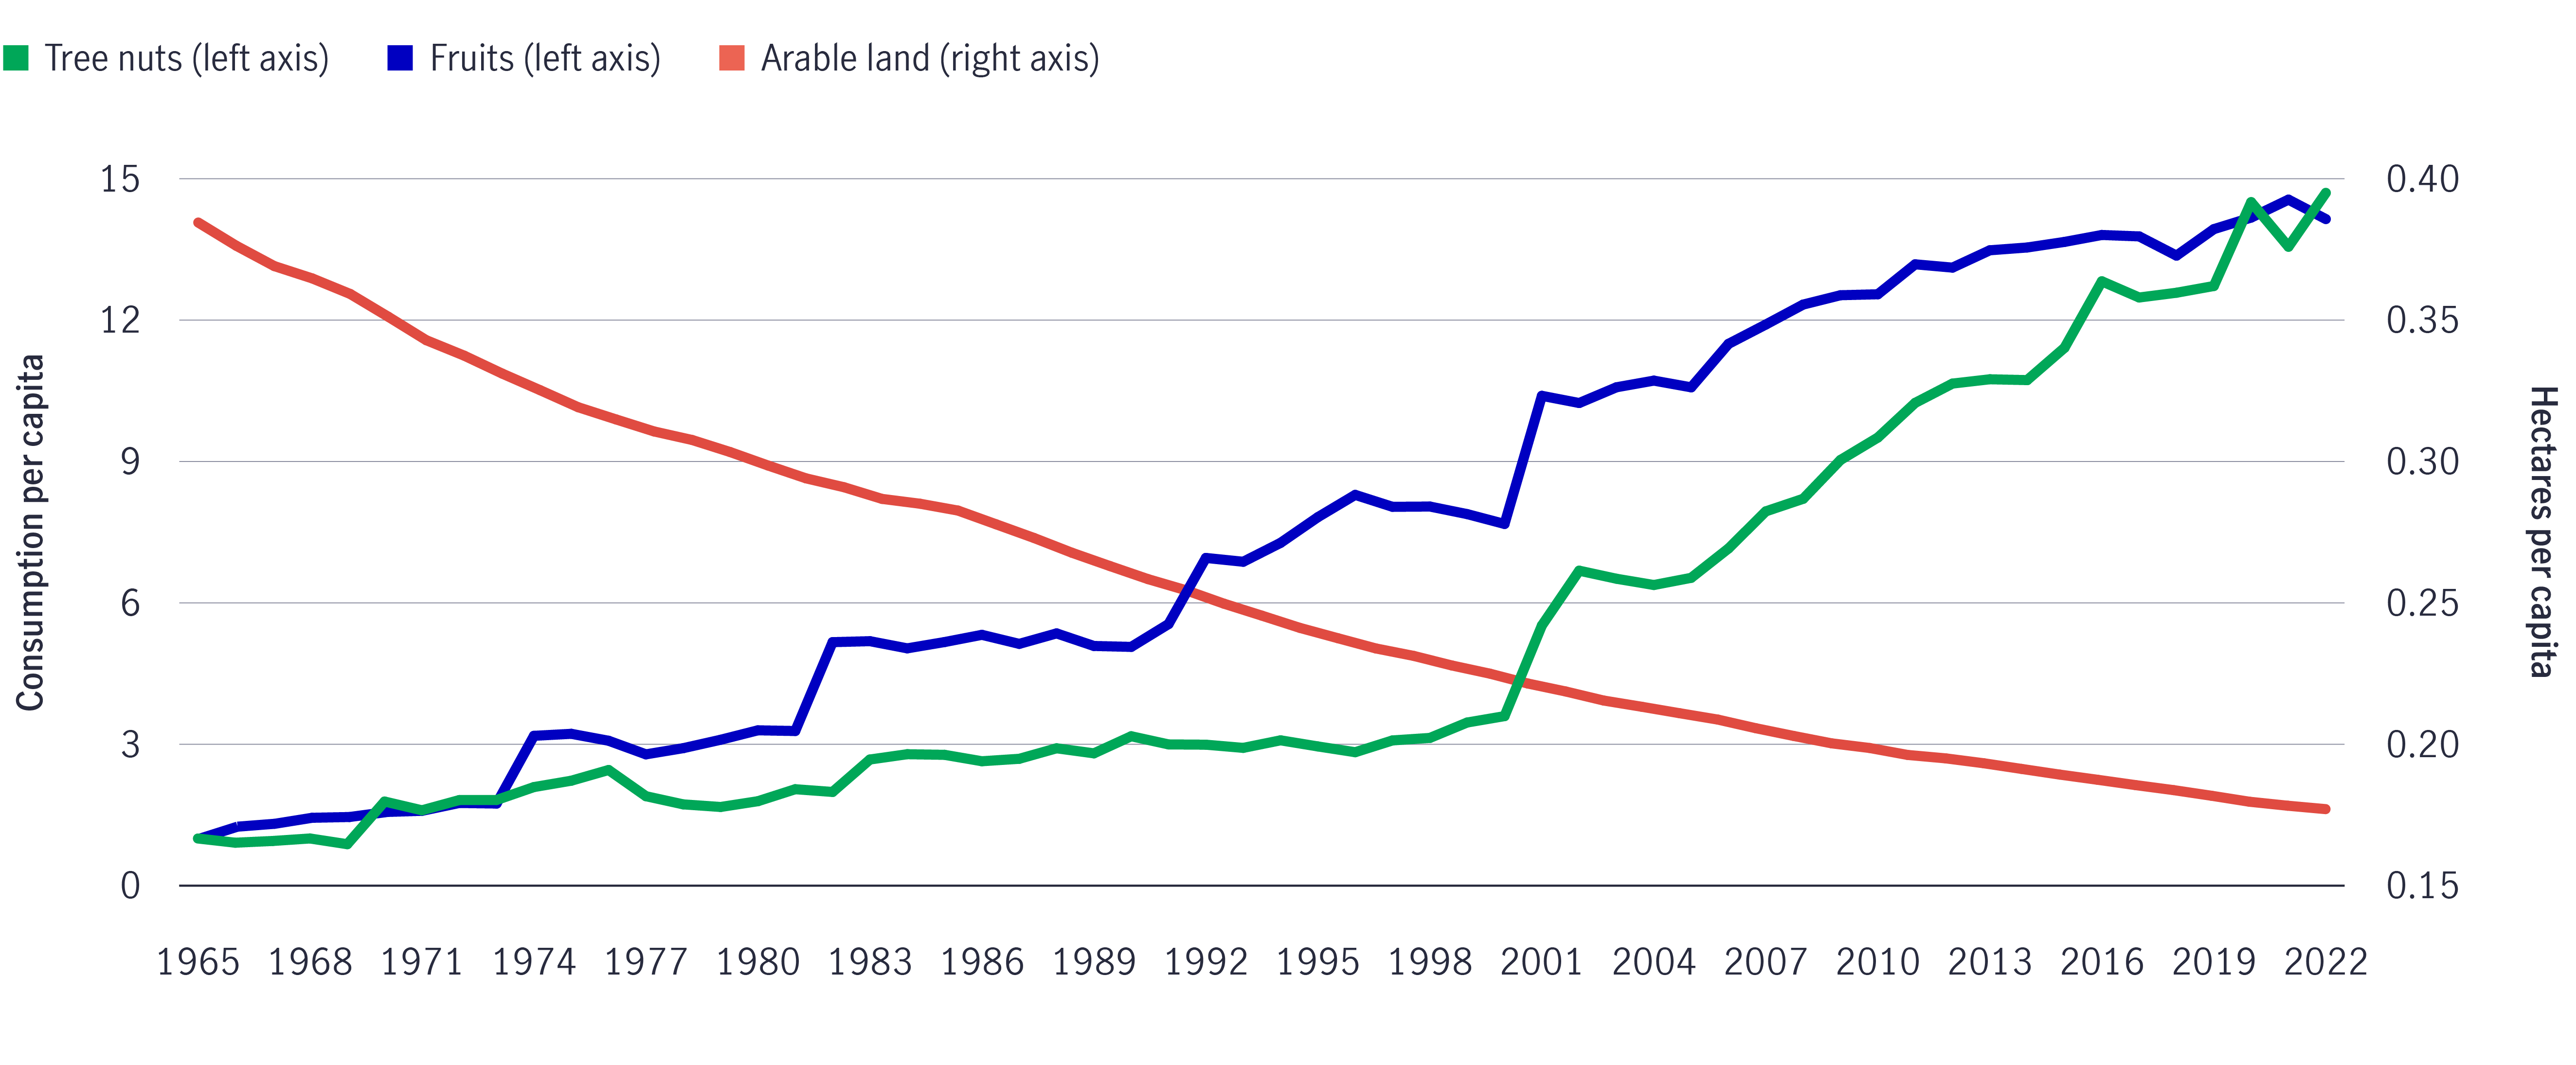 A chart shows declining arable land resources set against growing demand for tree nuts and fruits between 1965 and 2022.